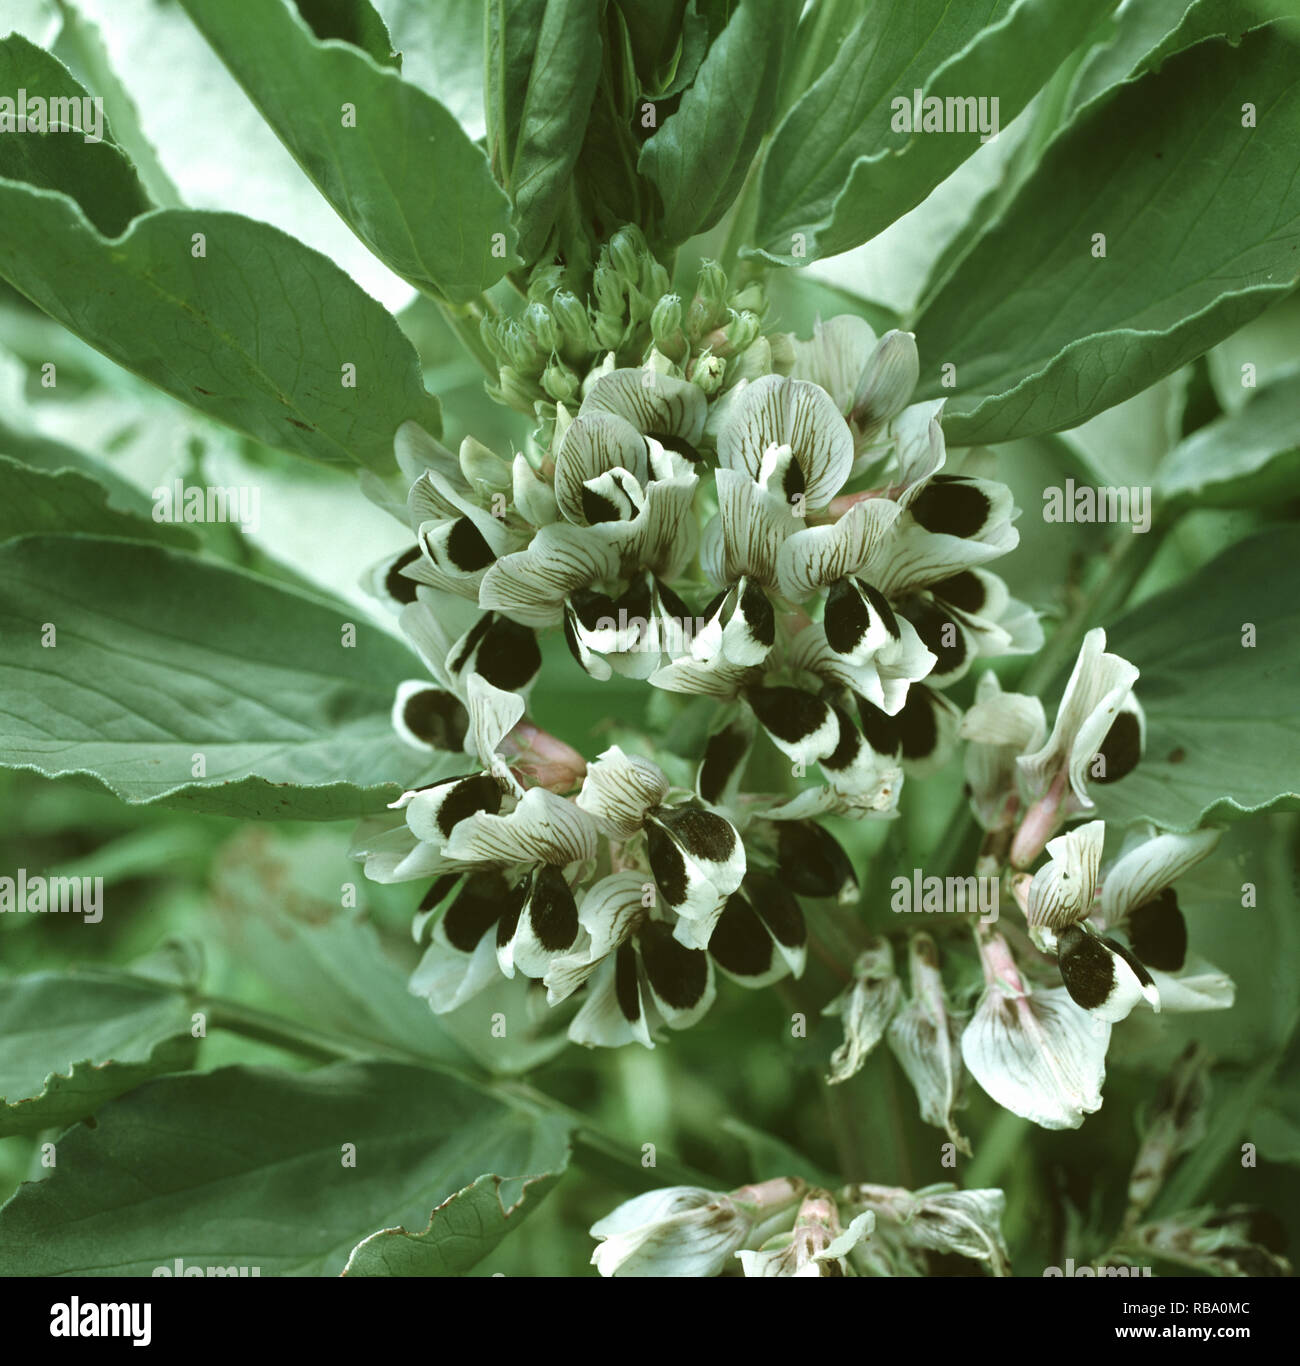 Close up of densely flowering broad bean (Vicia faba) plant Stock Photo